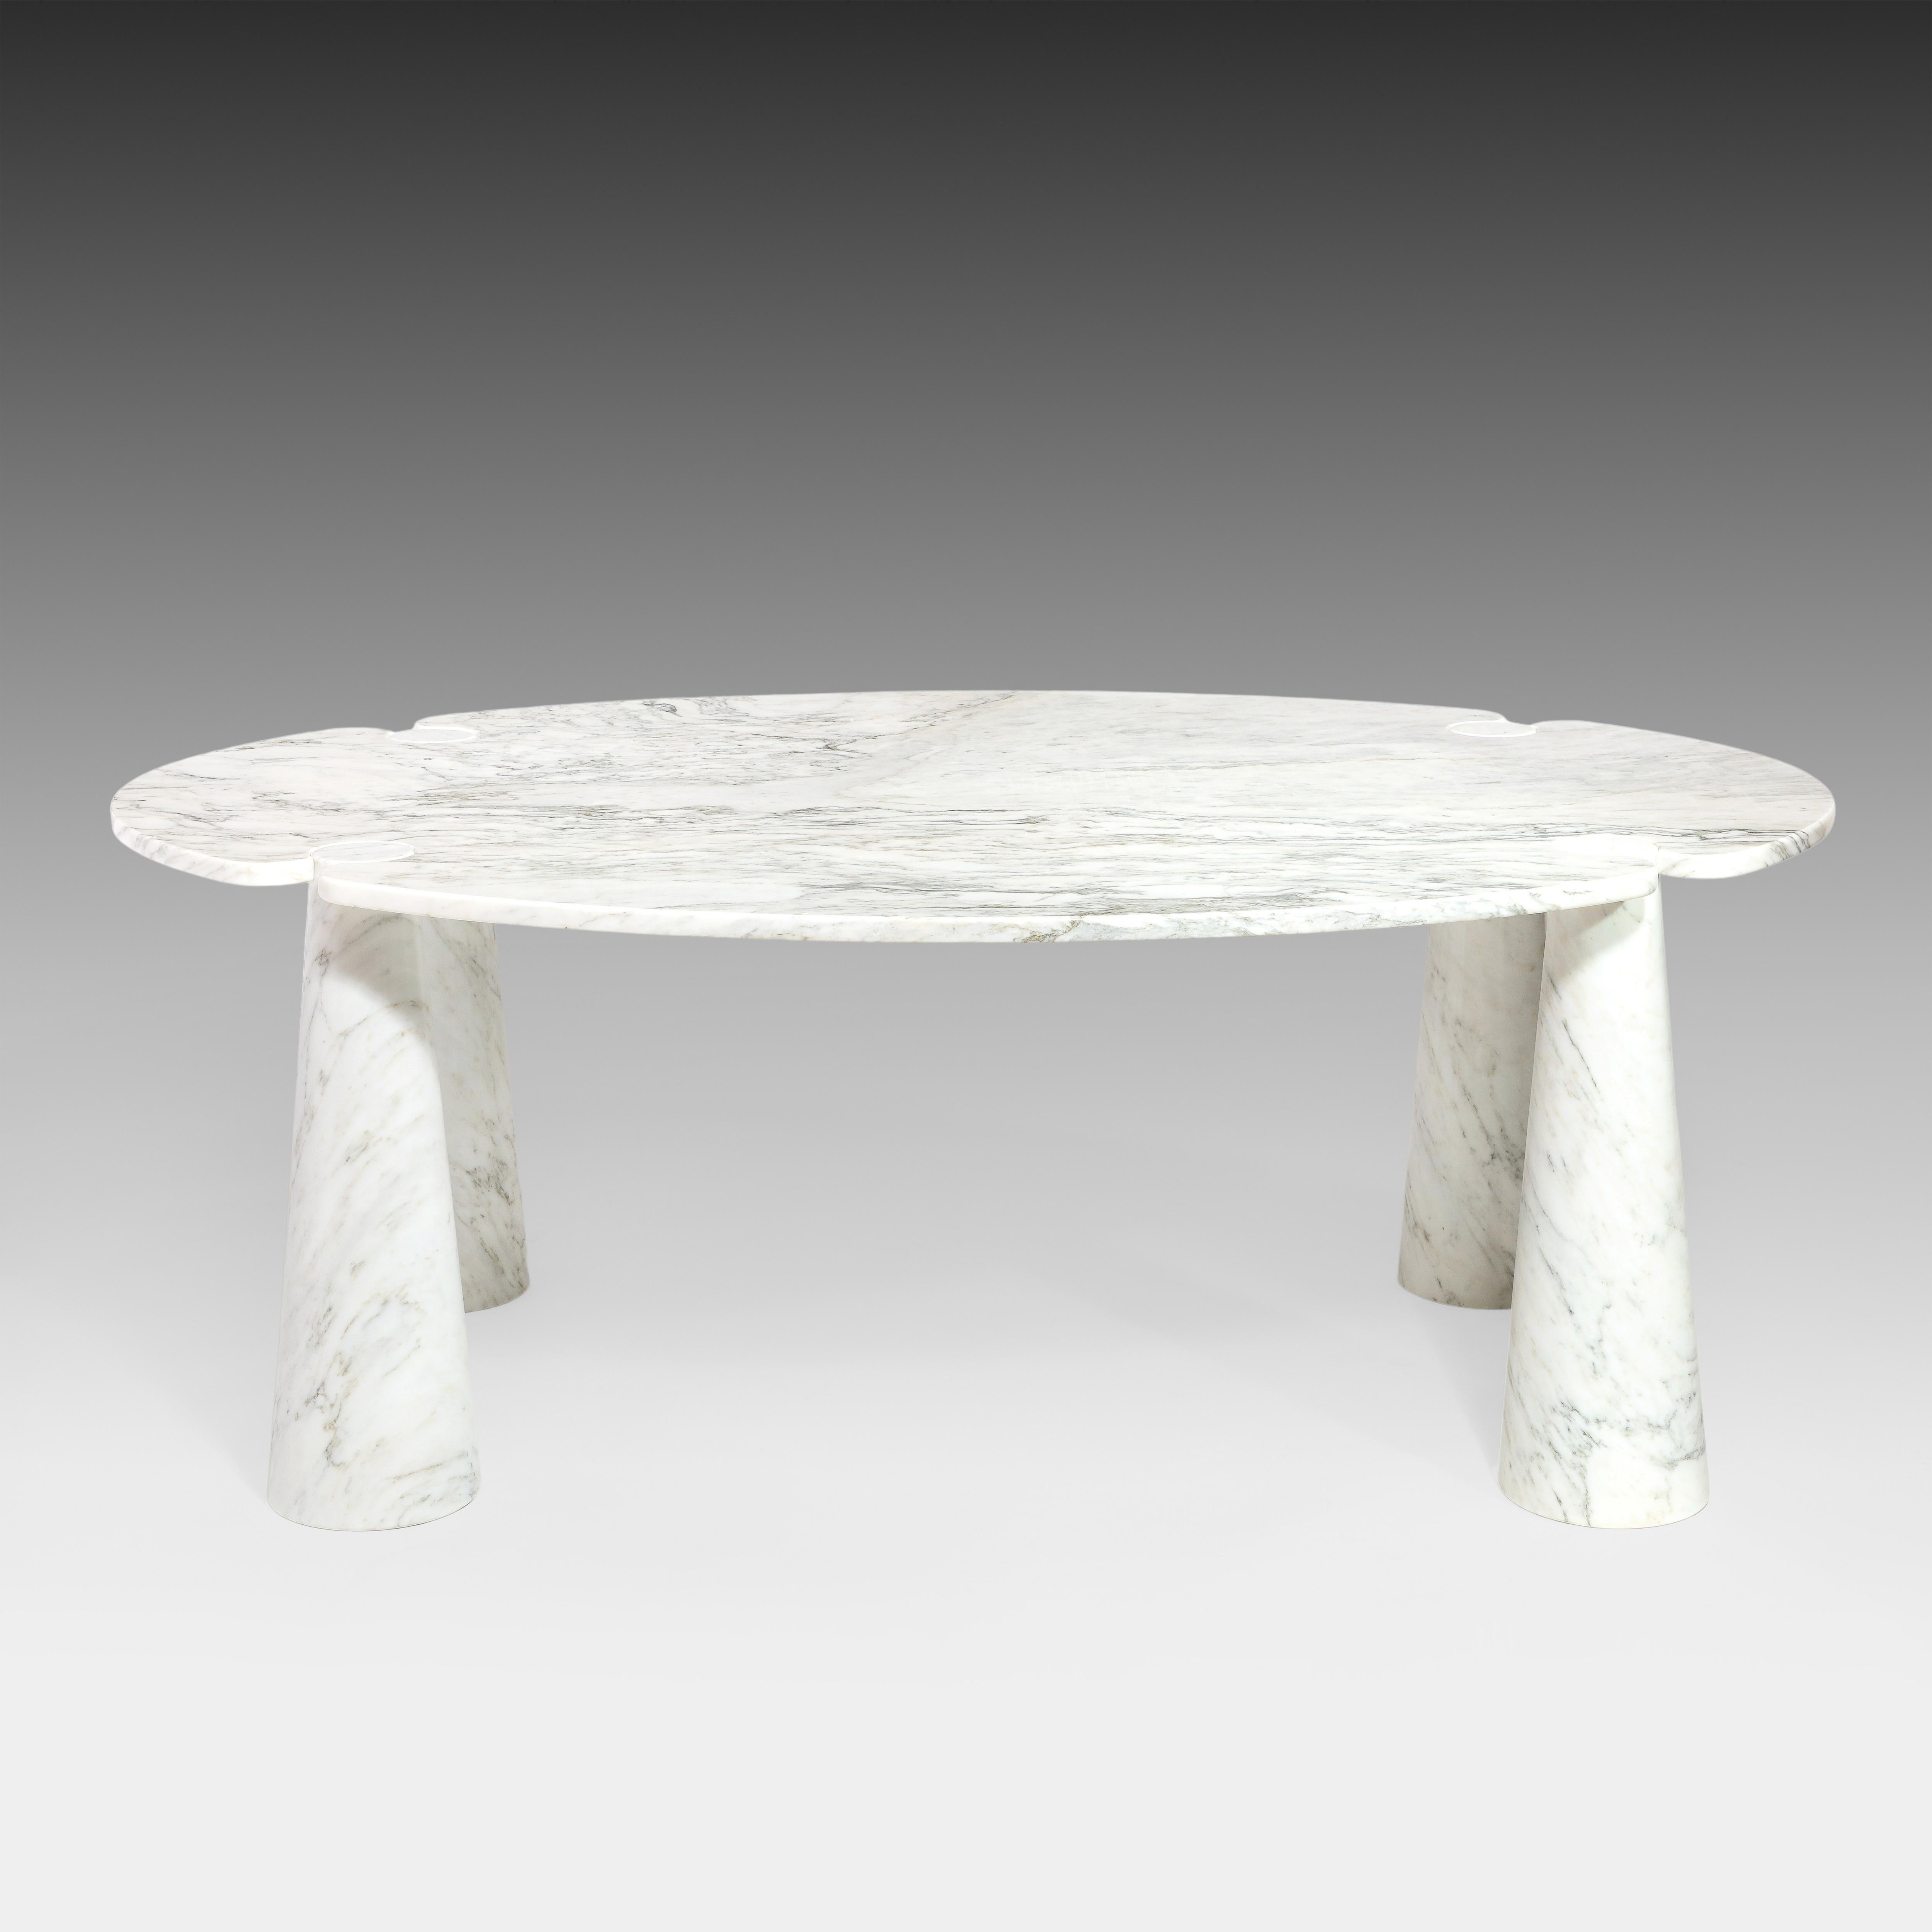 Angelo Mangiarotti for Skipper Carrara Marble Dining Table from Eros Series 1971